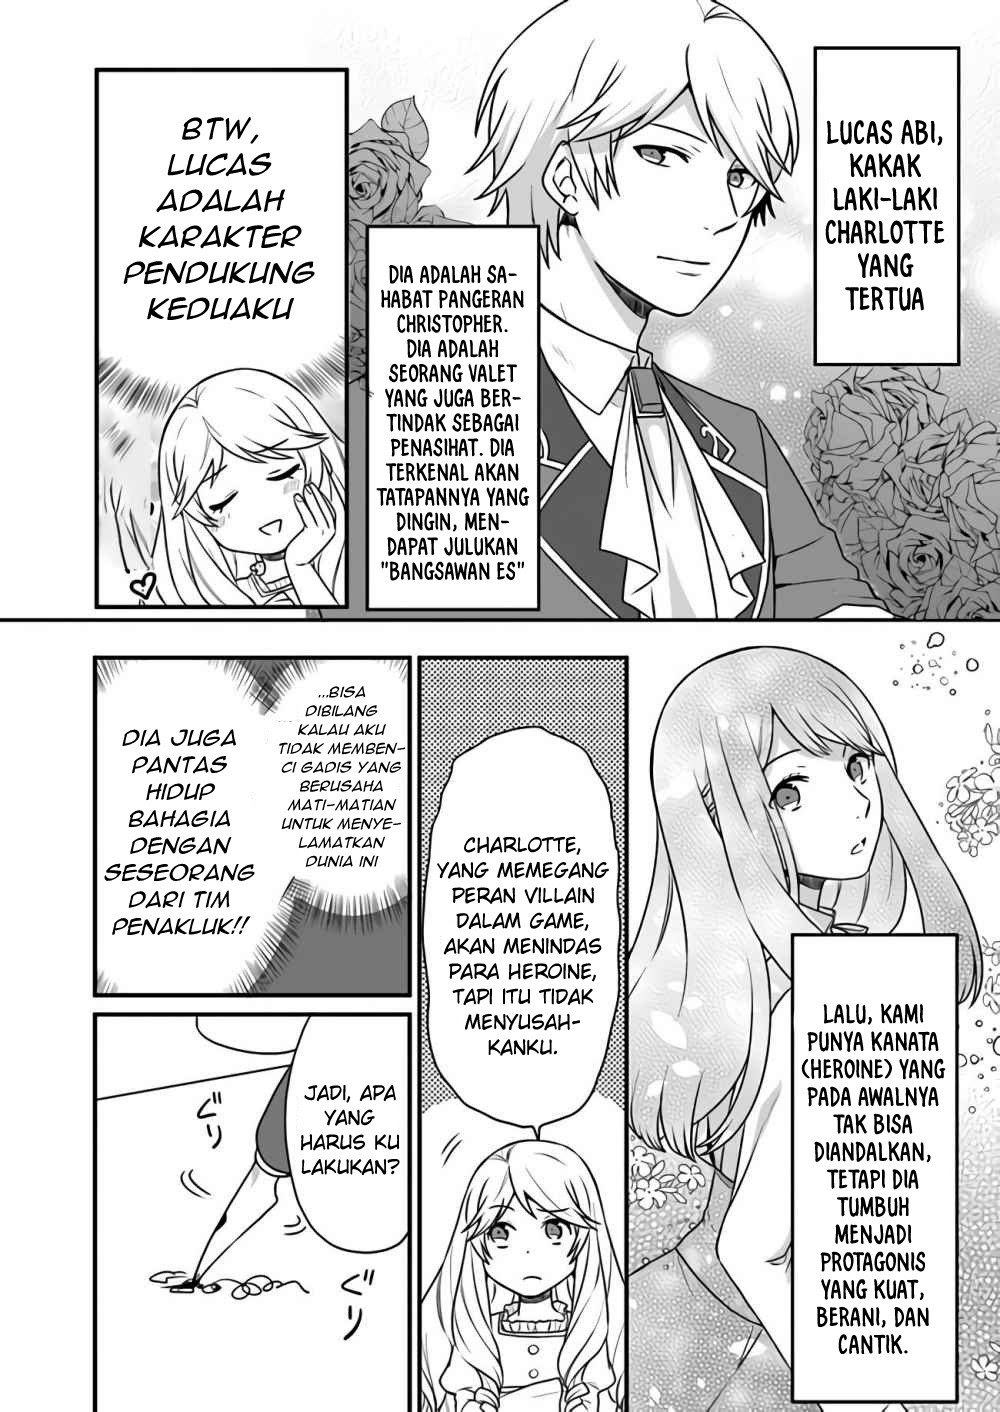 Dilarang COPAS - situs resmi www.mangacanblog.com - Komik as a result of breaking an otome game the villainess young lady becomes a cheat 001 - chapter 1 2 Indonesia as a result of breaking an otome game the villainess young lady becomes a cheat 001 - chapter 1 Terbaru 14|Baca Manga Komik Indonesia|Mangacan